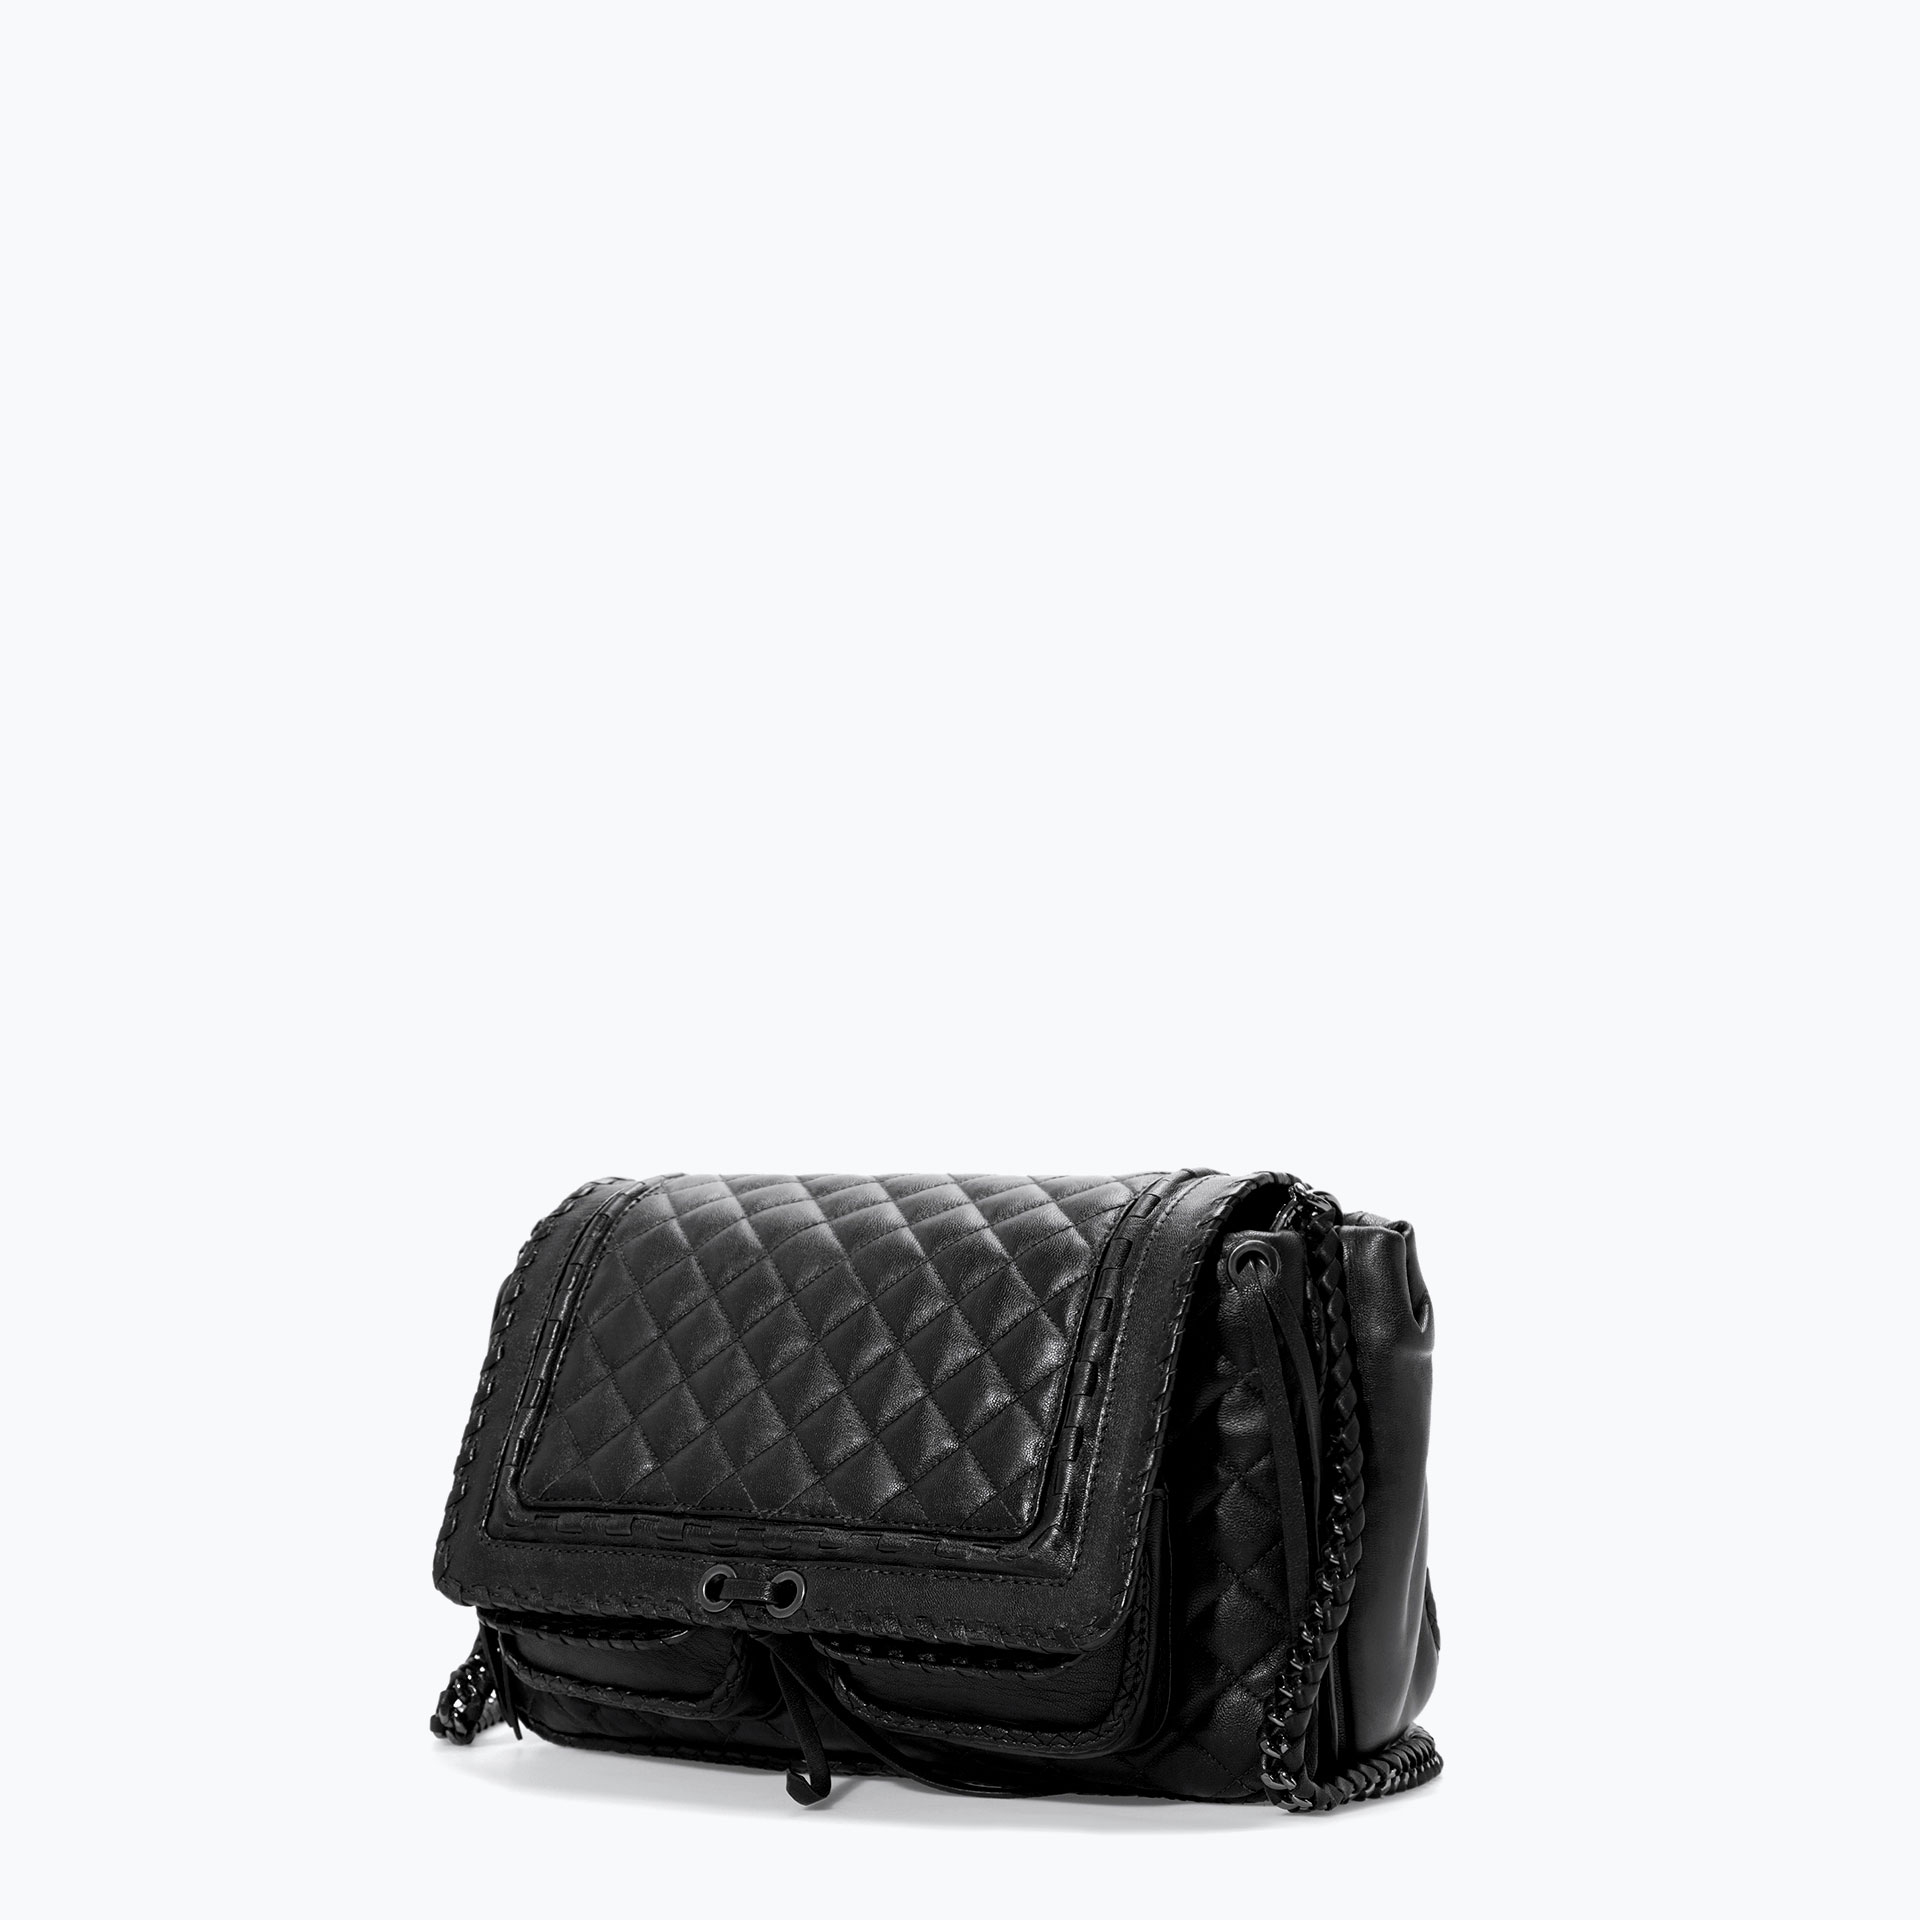 Zara Quilted Leather City Bag in Black